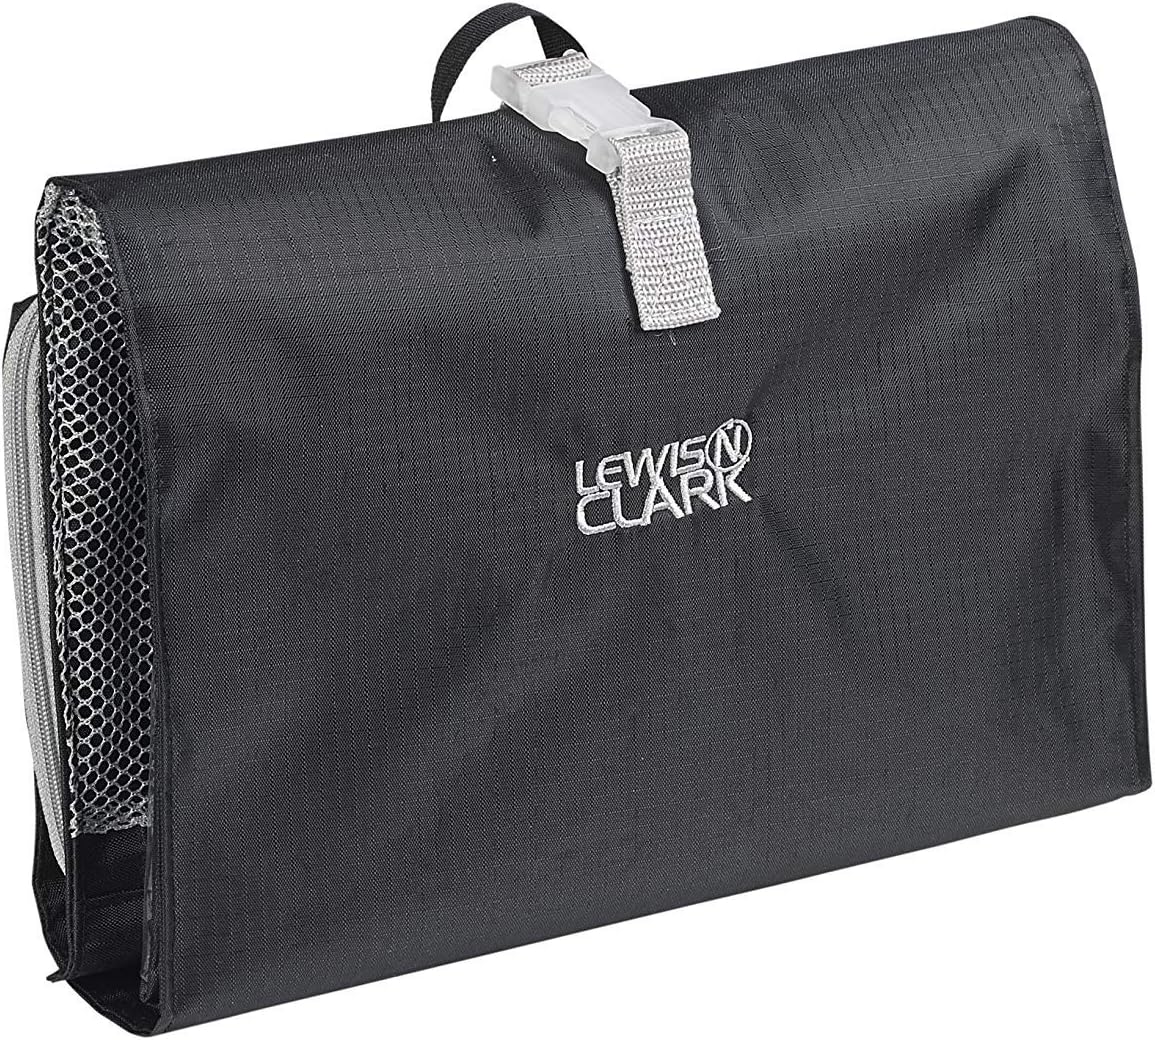 Lewis N. Clark Hanging Toiletry Bag for Travel Accessories, Shampoo, Cosmetics + Personal Items with Waterproof Compartment and Folding Design,Black